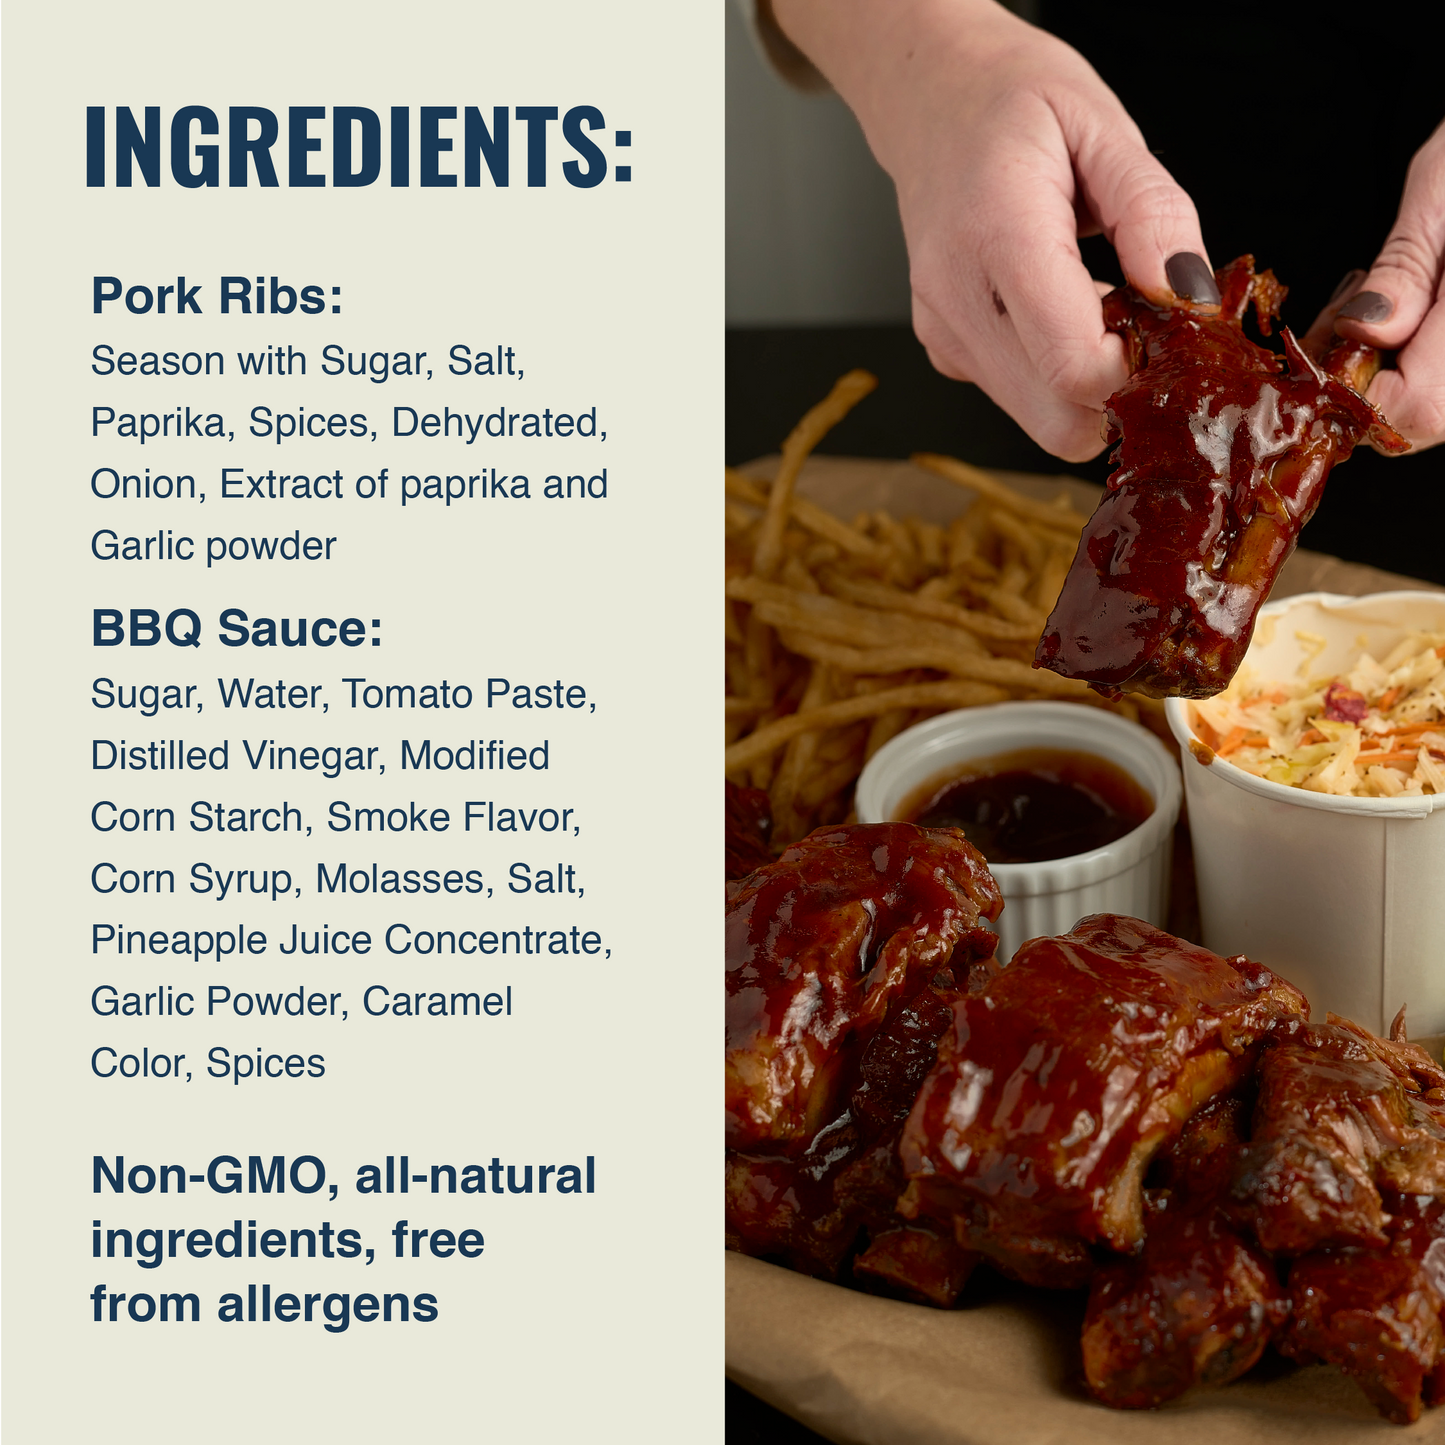 Smokehouse Signature Bundle: Smoked Beef Brisket + Pork Baby Back Ribs + Chicken BBQ 3-For-1 Combo Pack